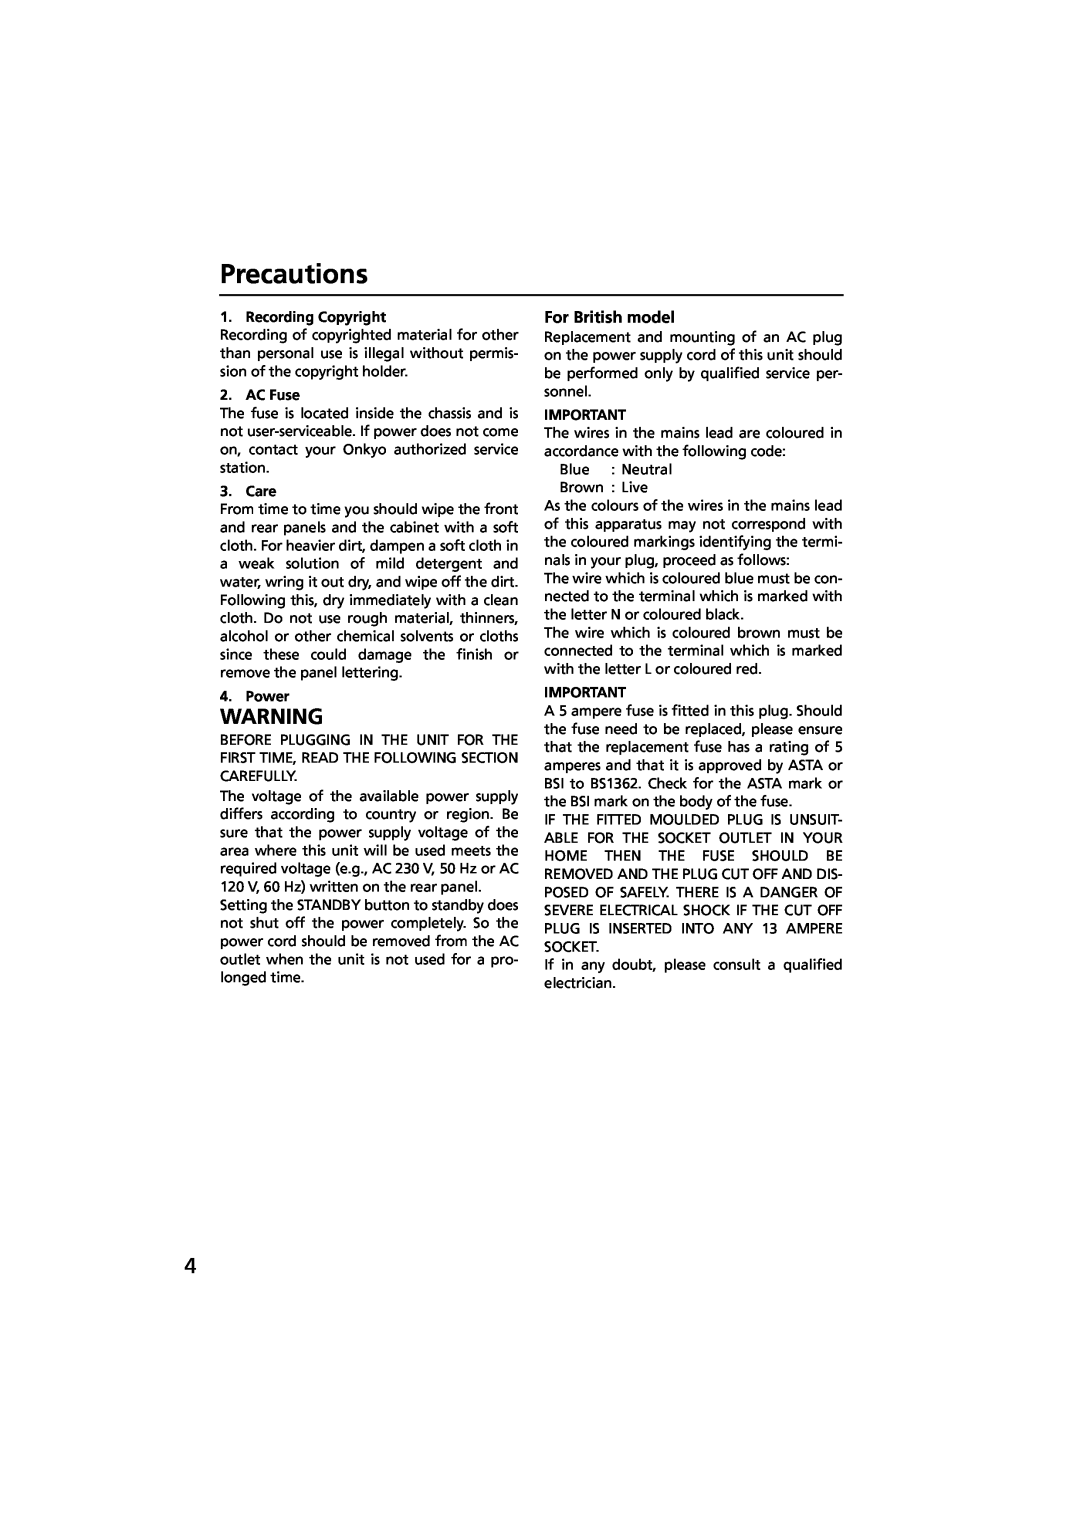 Onkyo R-801A instruction manual Precautions, For British model, Recording Copyright, AC Fuse, Care, Power 